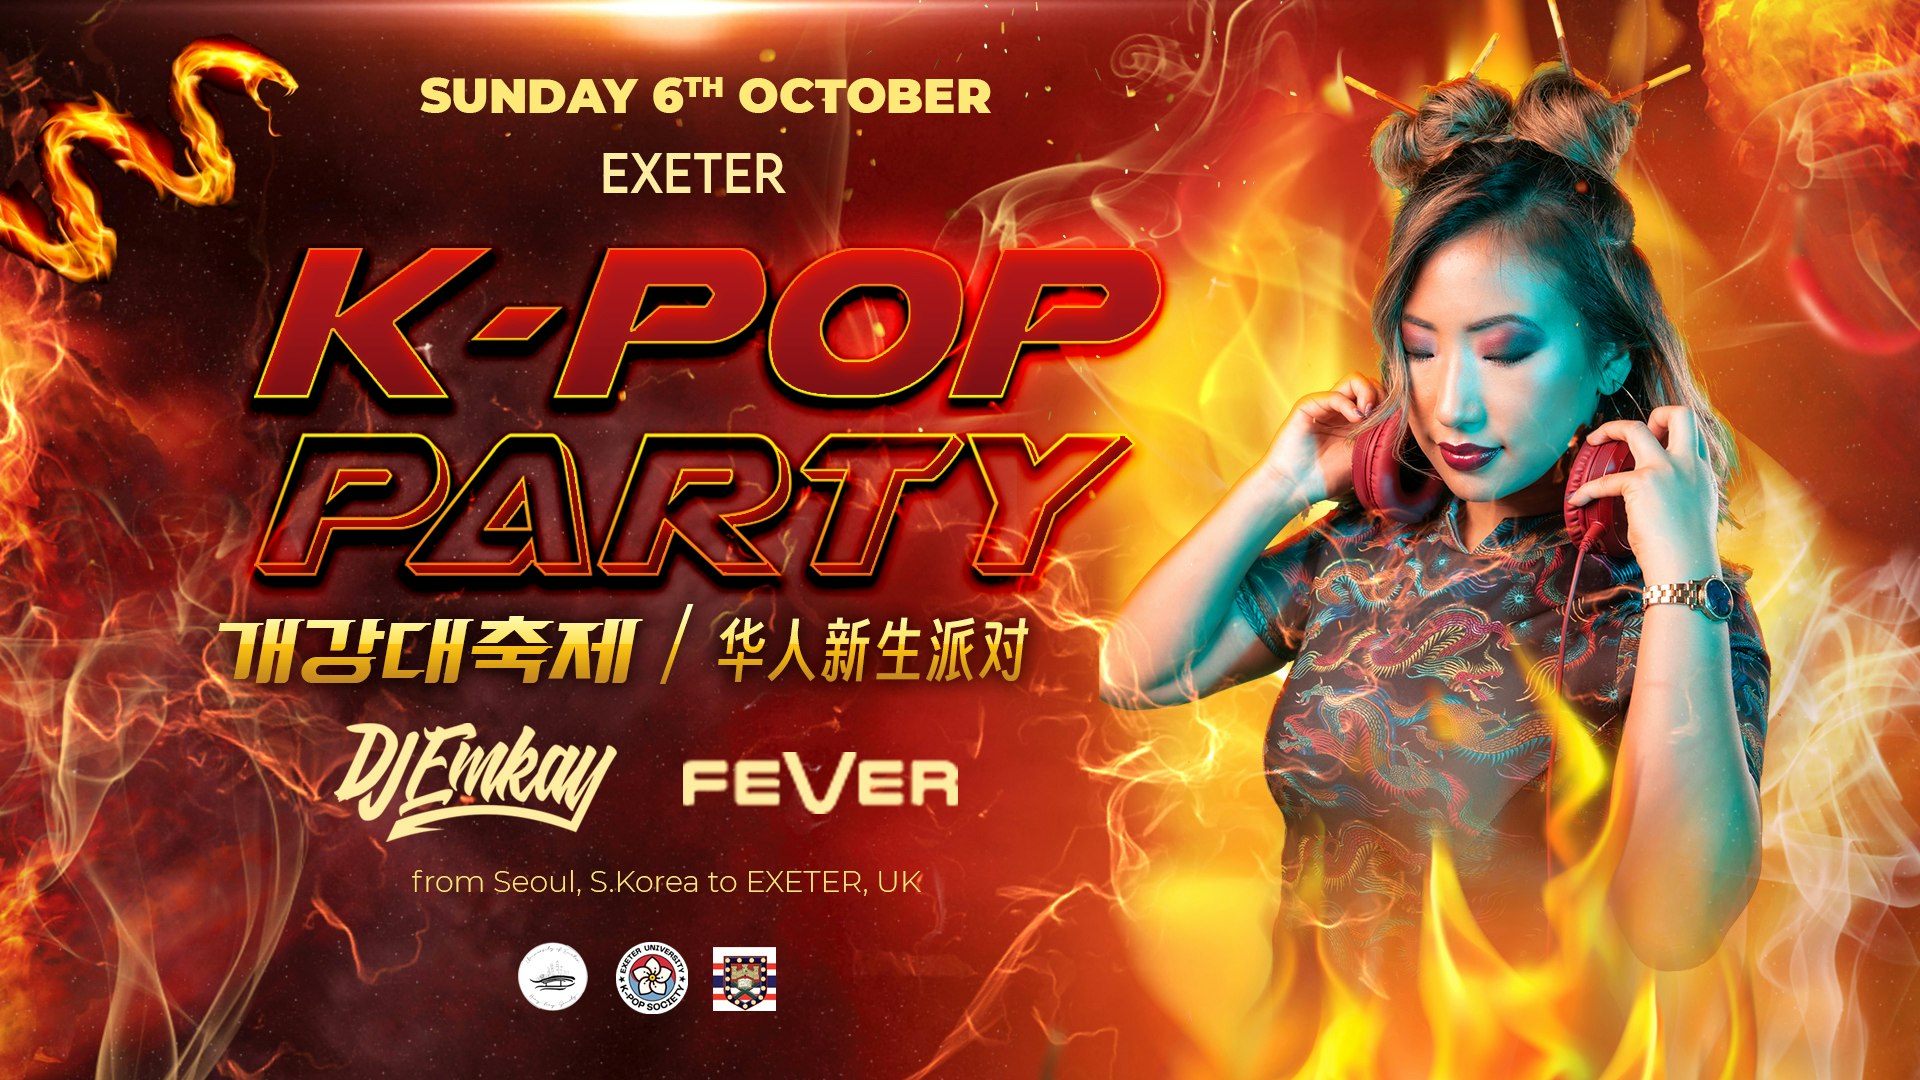 Exeter K-Pop Party – Fire Tour with DJ EMKAY | Sunday 6th October